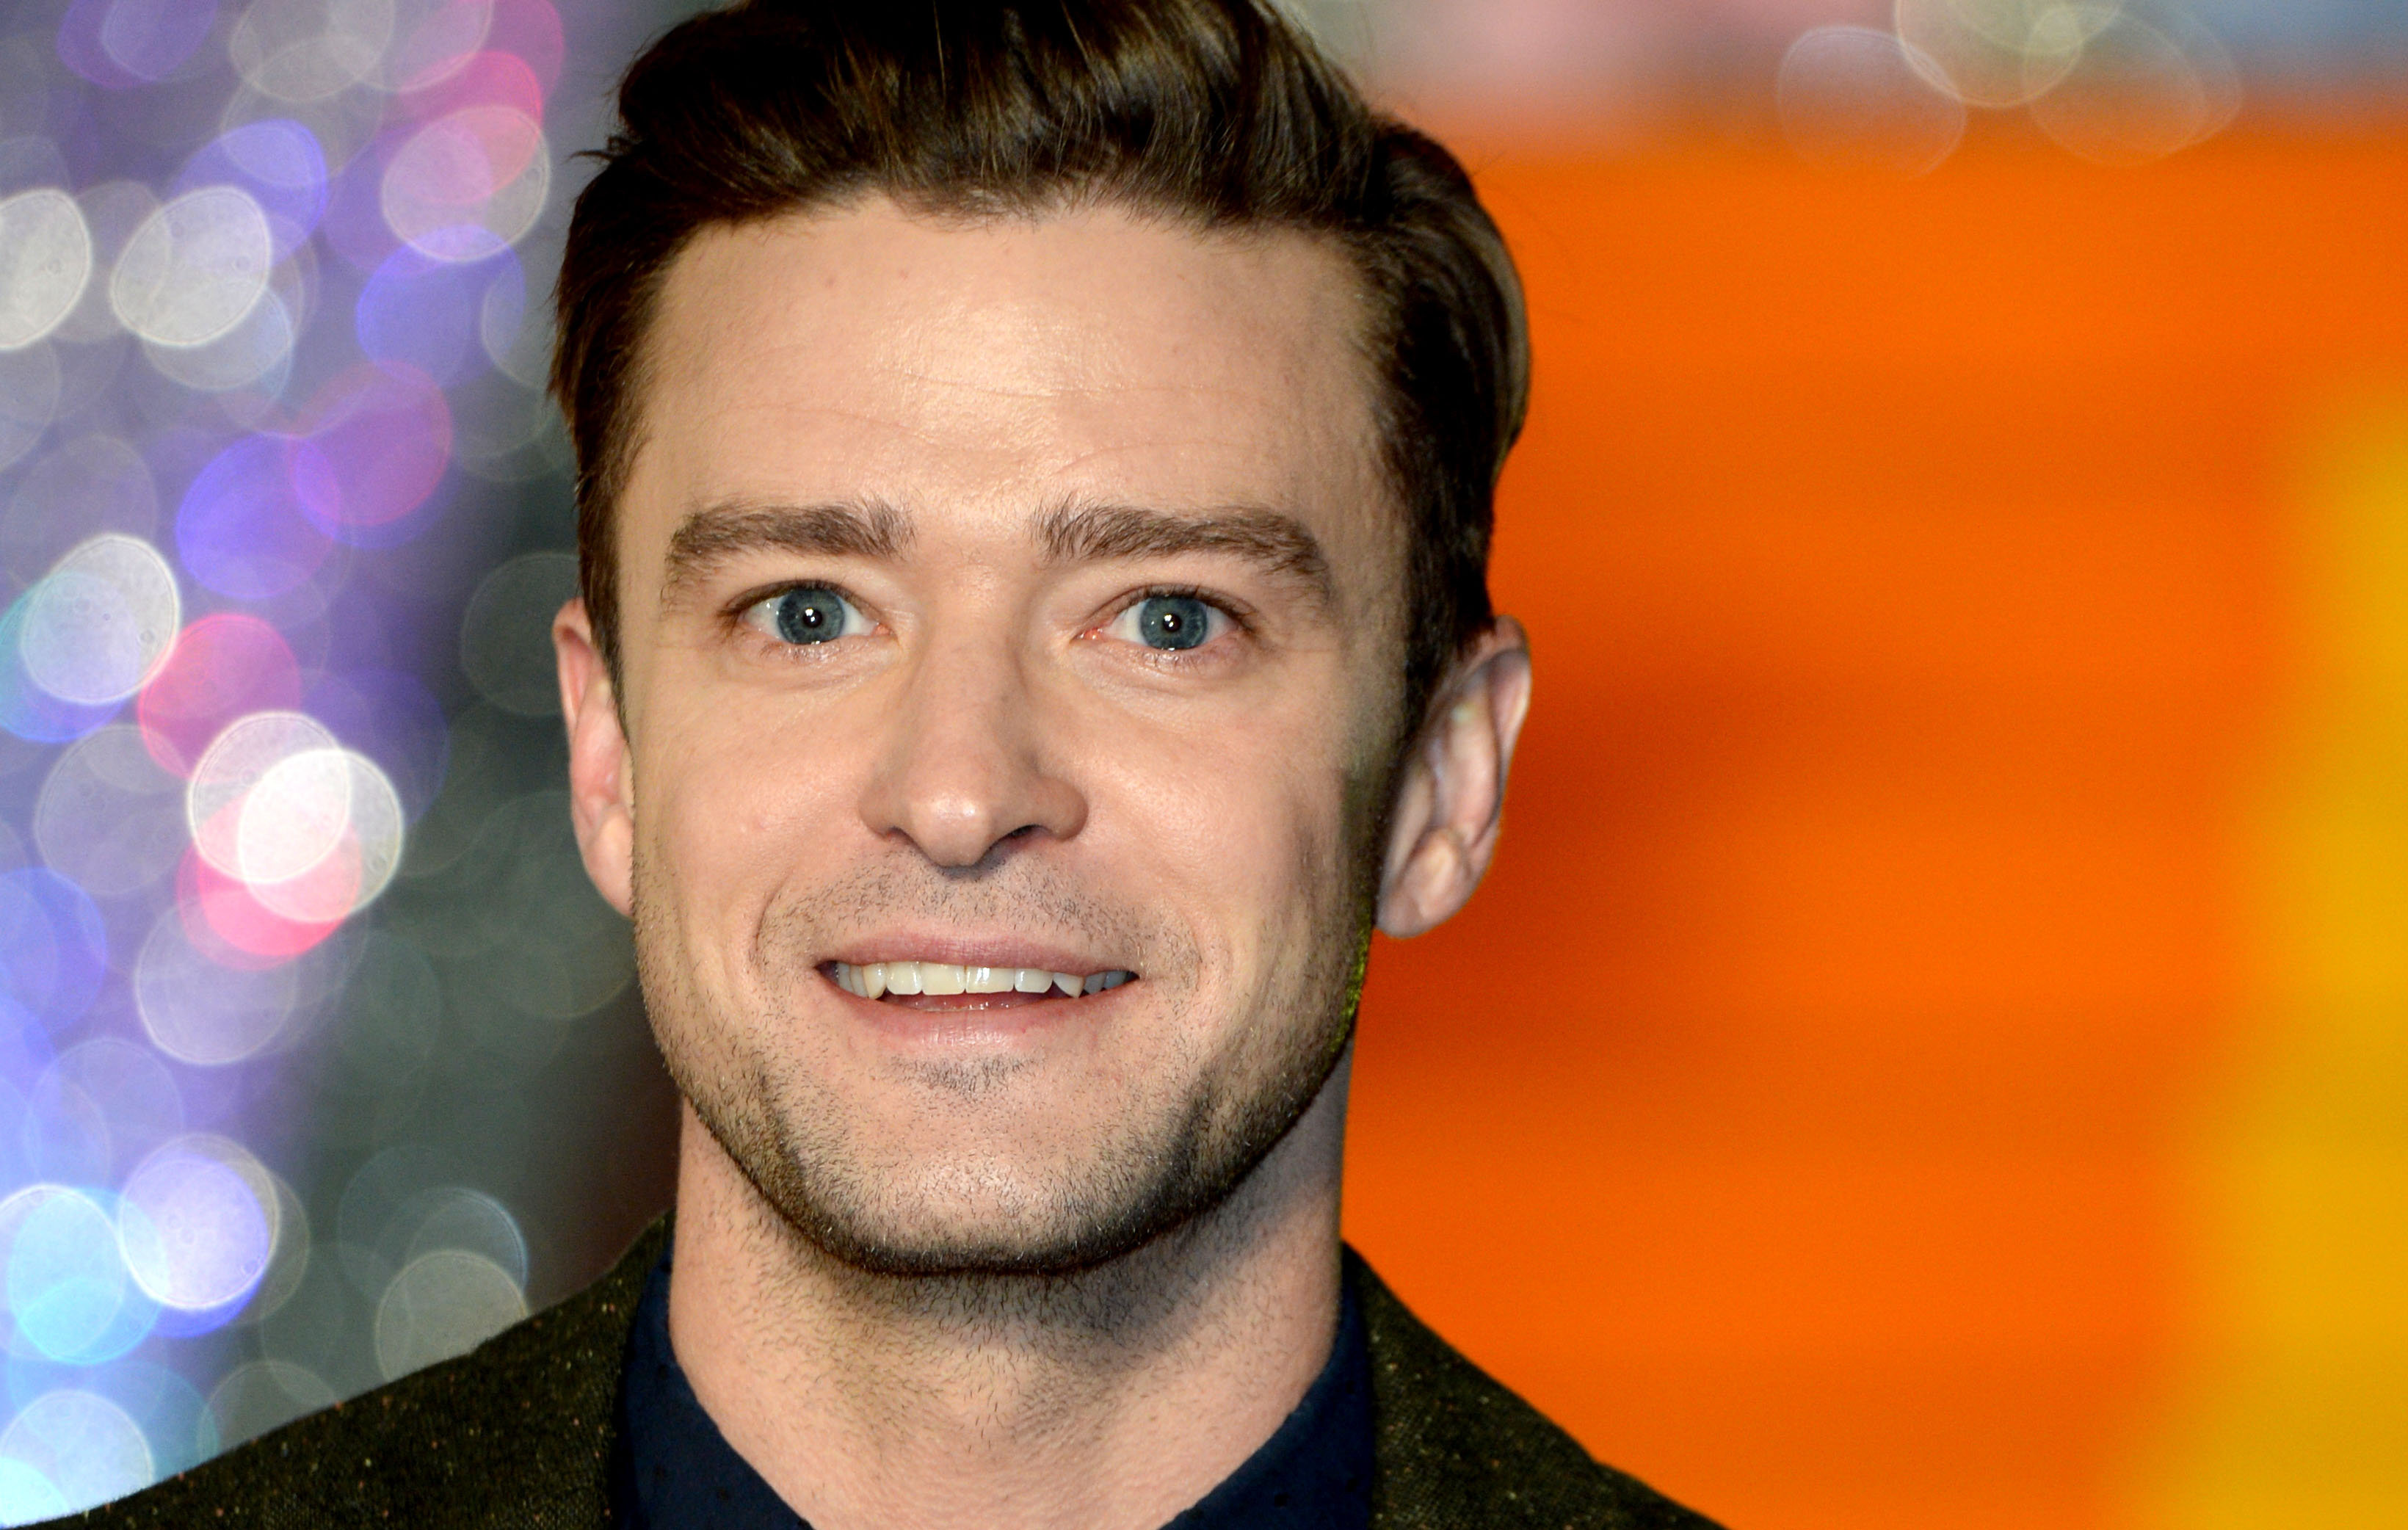 <strong>Justin Timberlake set up a company to purchase real estate in the Bahamas</strong>